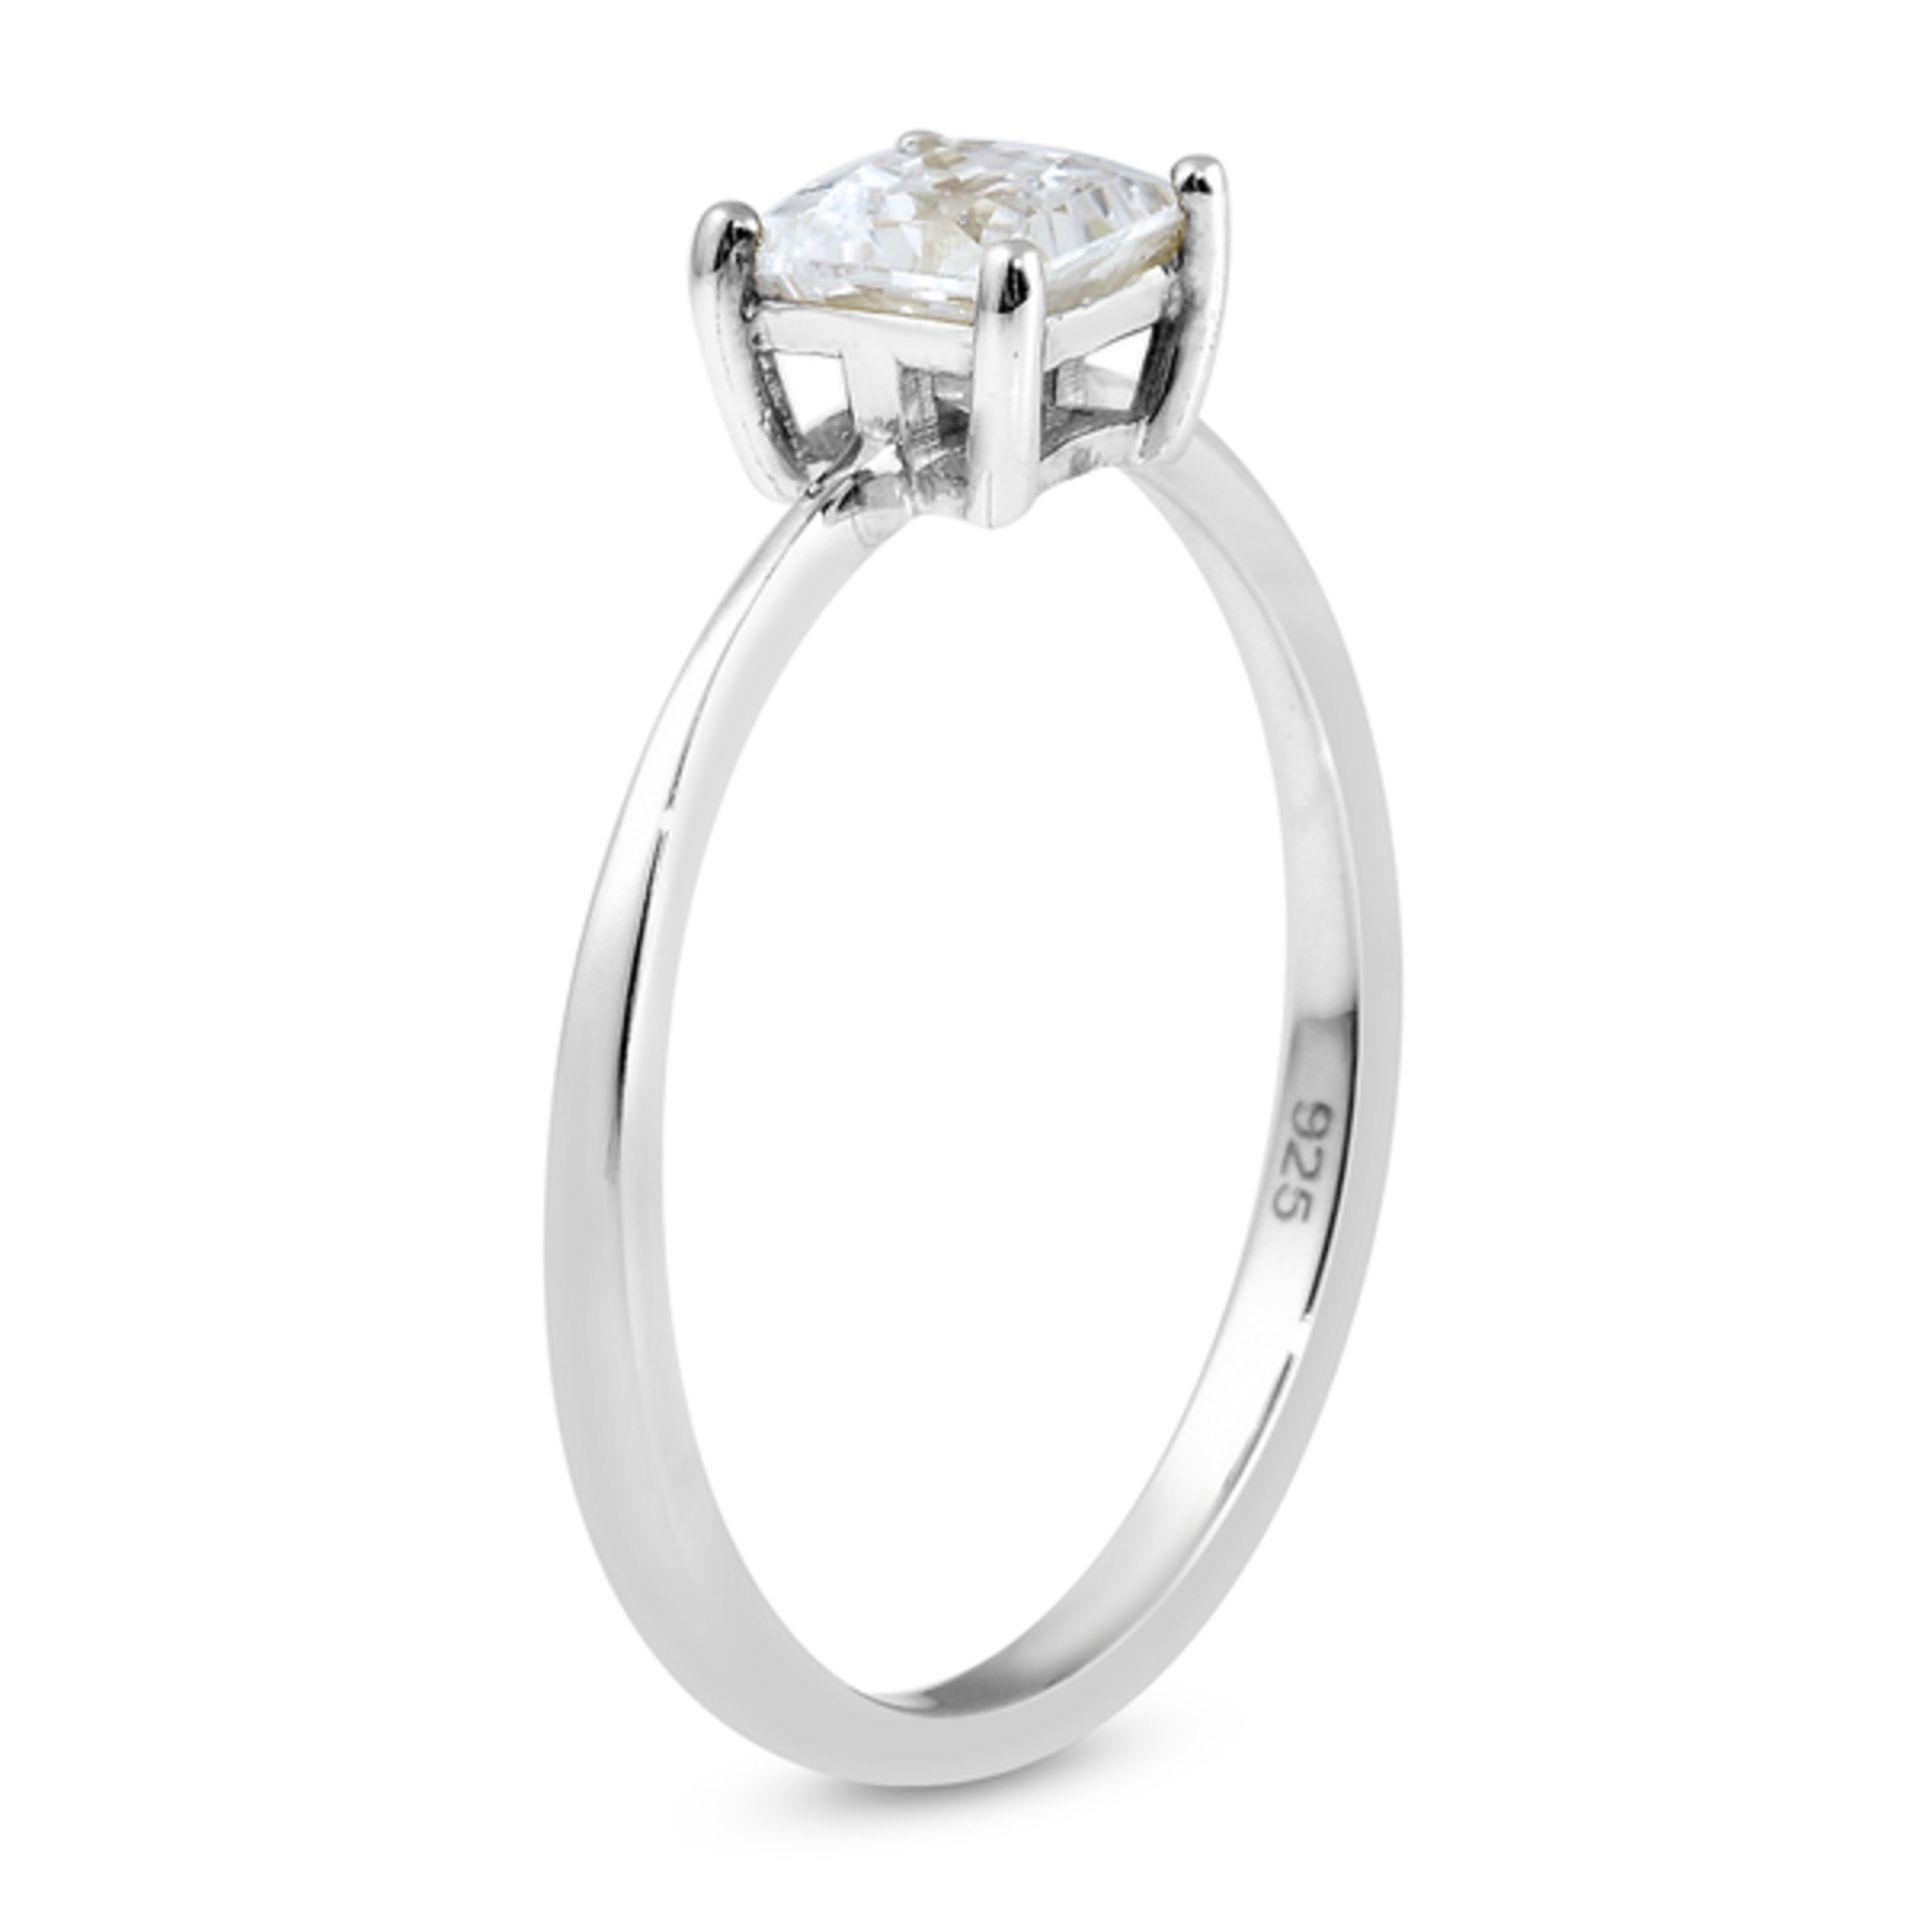 NEW!! J Francis Sterling Silver Solitaire Ring Made with SWAROVSKI ZIRCONIA - Image 2 of 3